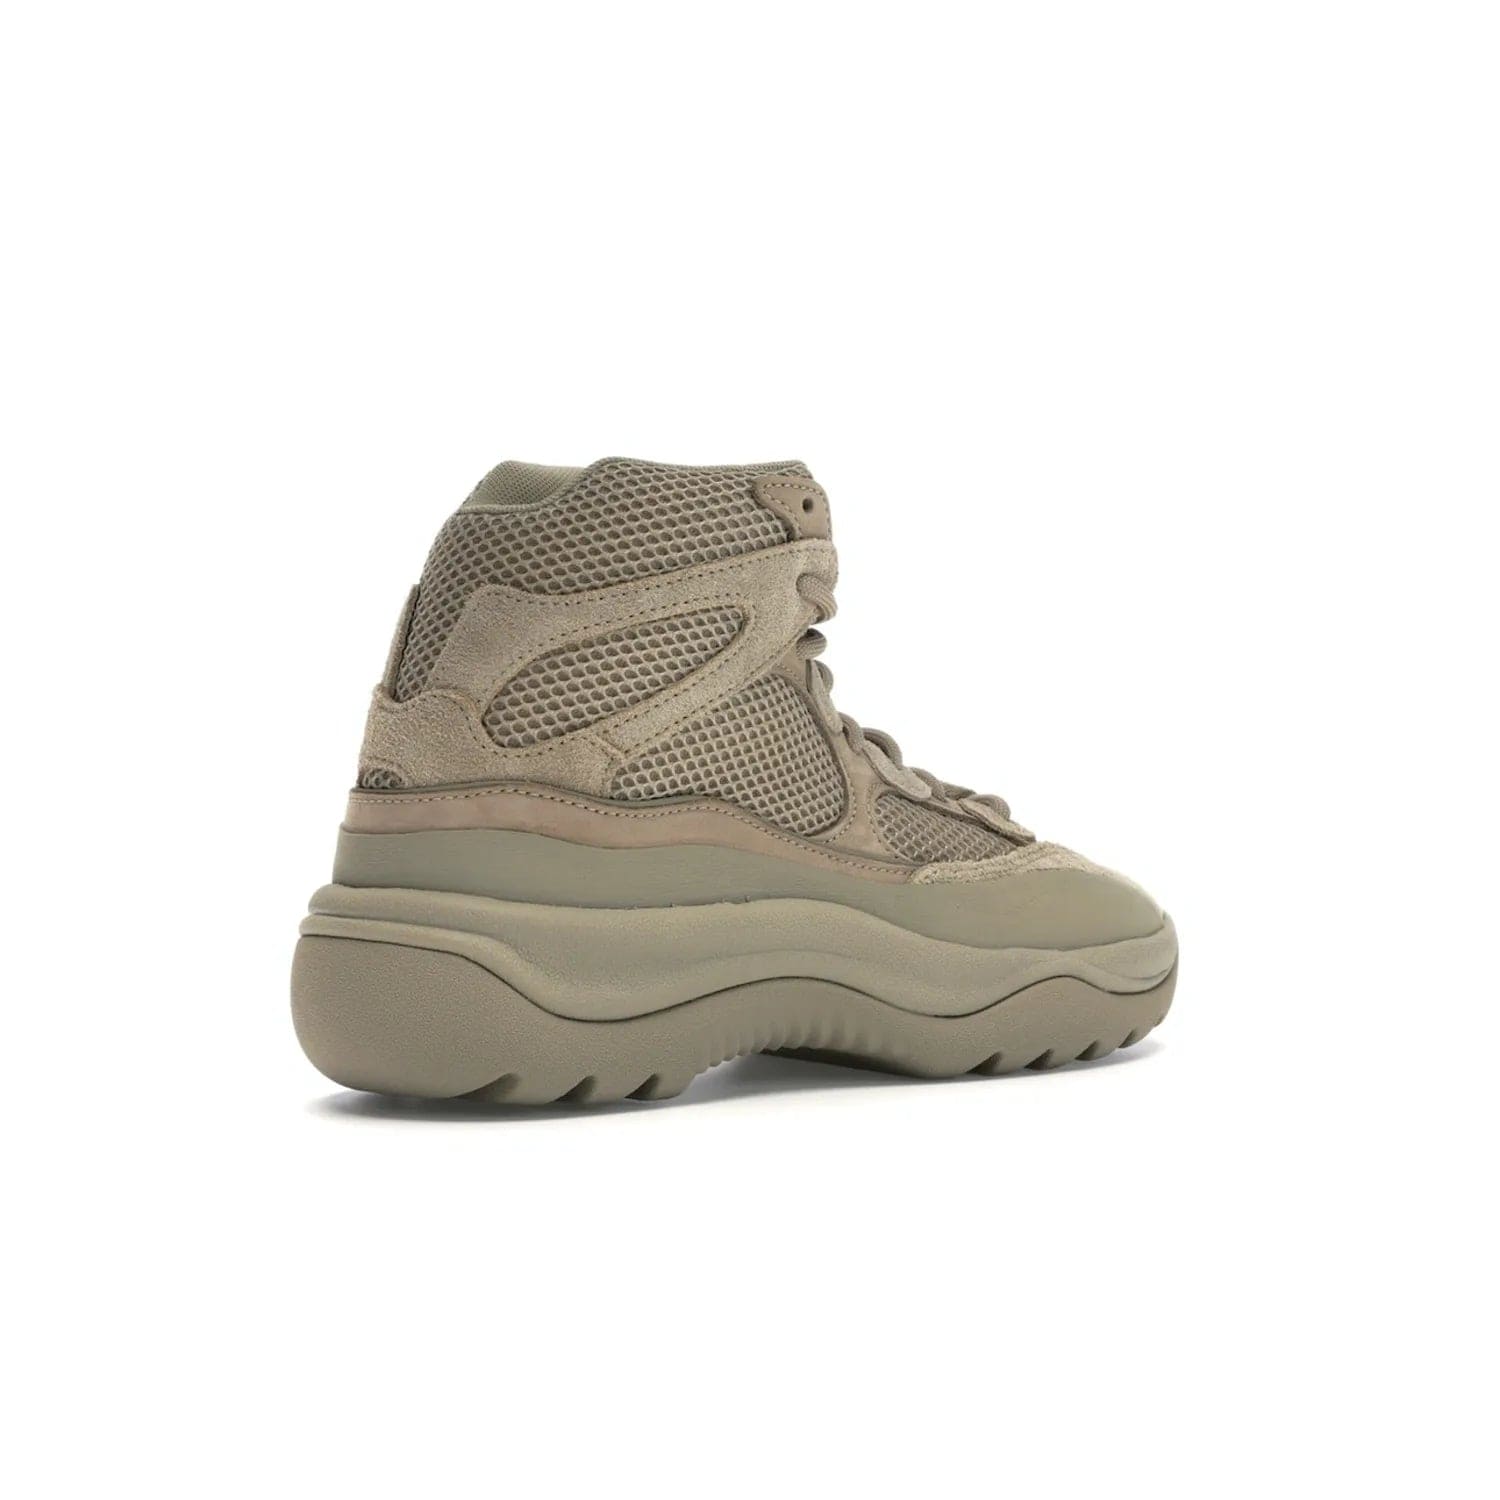 adidas Yeezy Desert Boot Rock - Image 33 - Only at www.BallersClubKickz.com - #
This season, make a fashion statement with the adidas Yeezy Desert Boot Rock. Nubuck and suede upper offers tonal style while the grooved sole provides traction and stability. Get yours in April 2019.